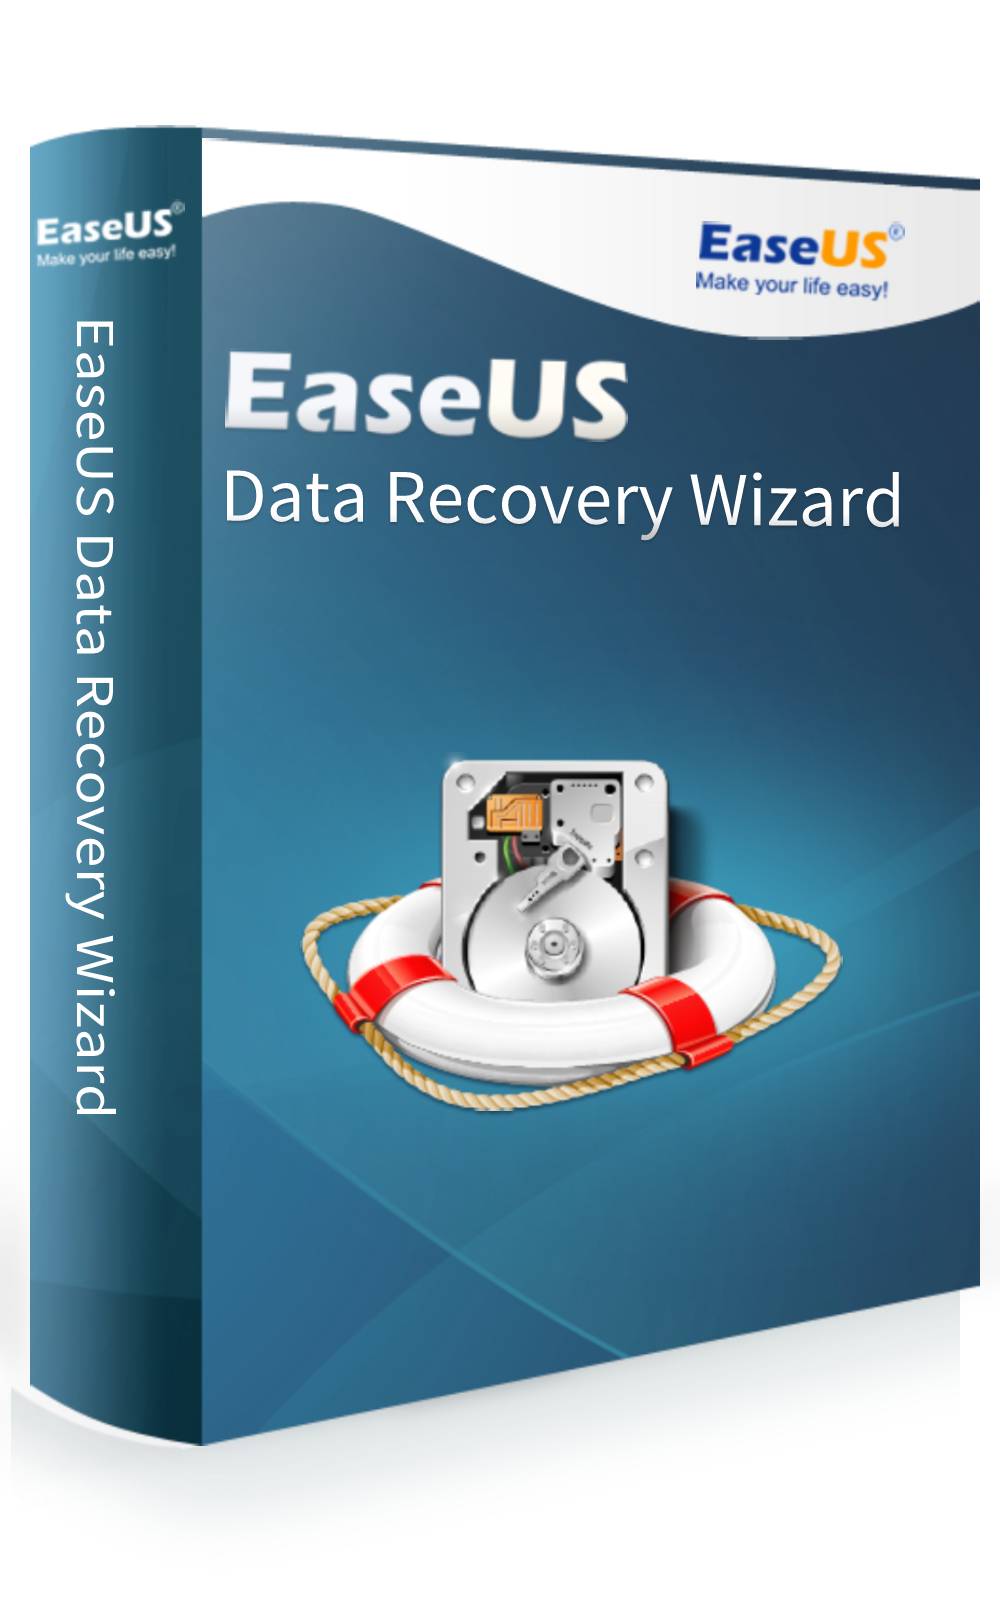 EaseUS Software EaseUS Data Recovery Wizard Professional (Yearly Subscription)